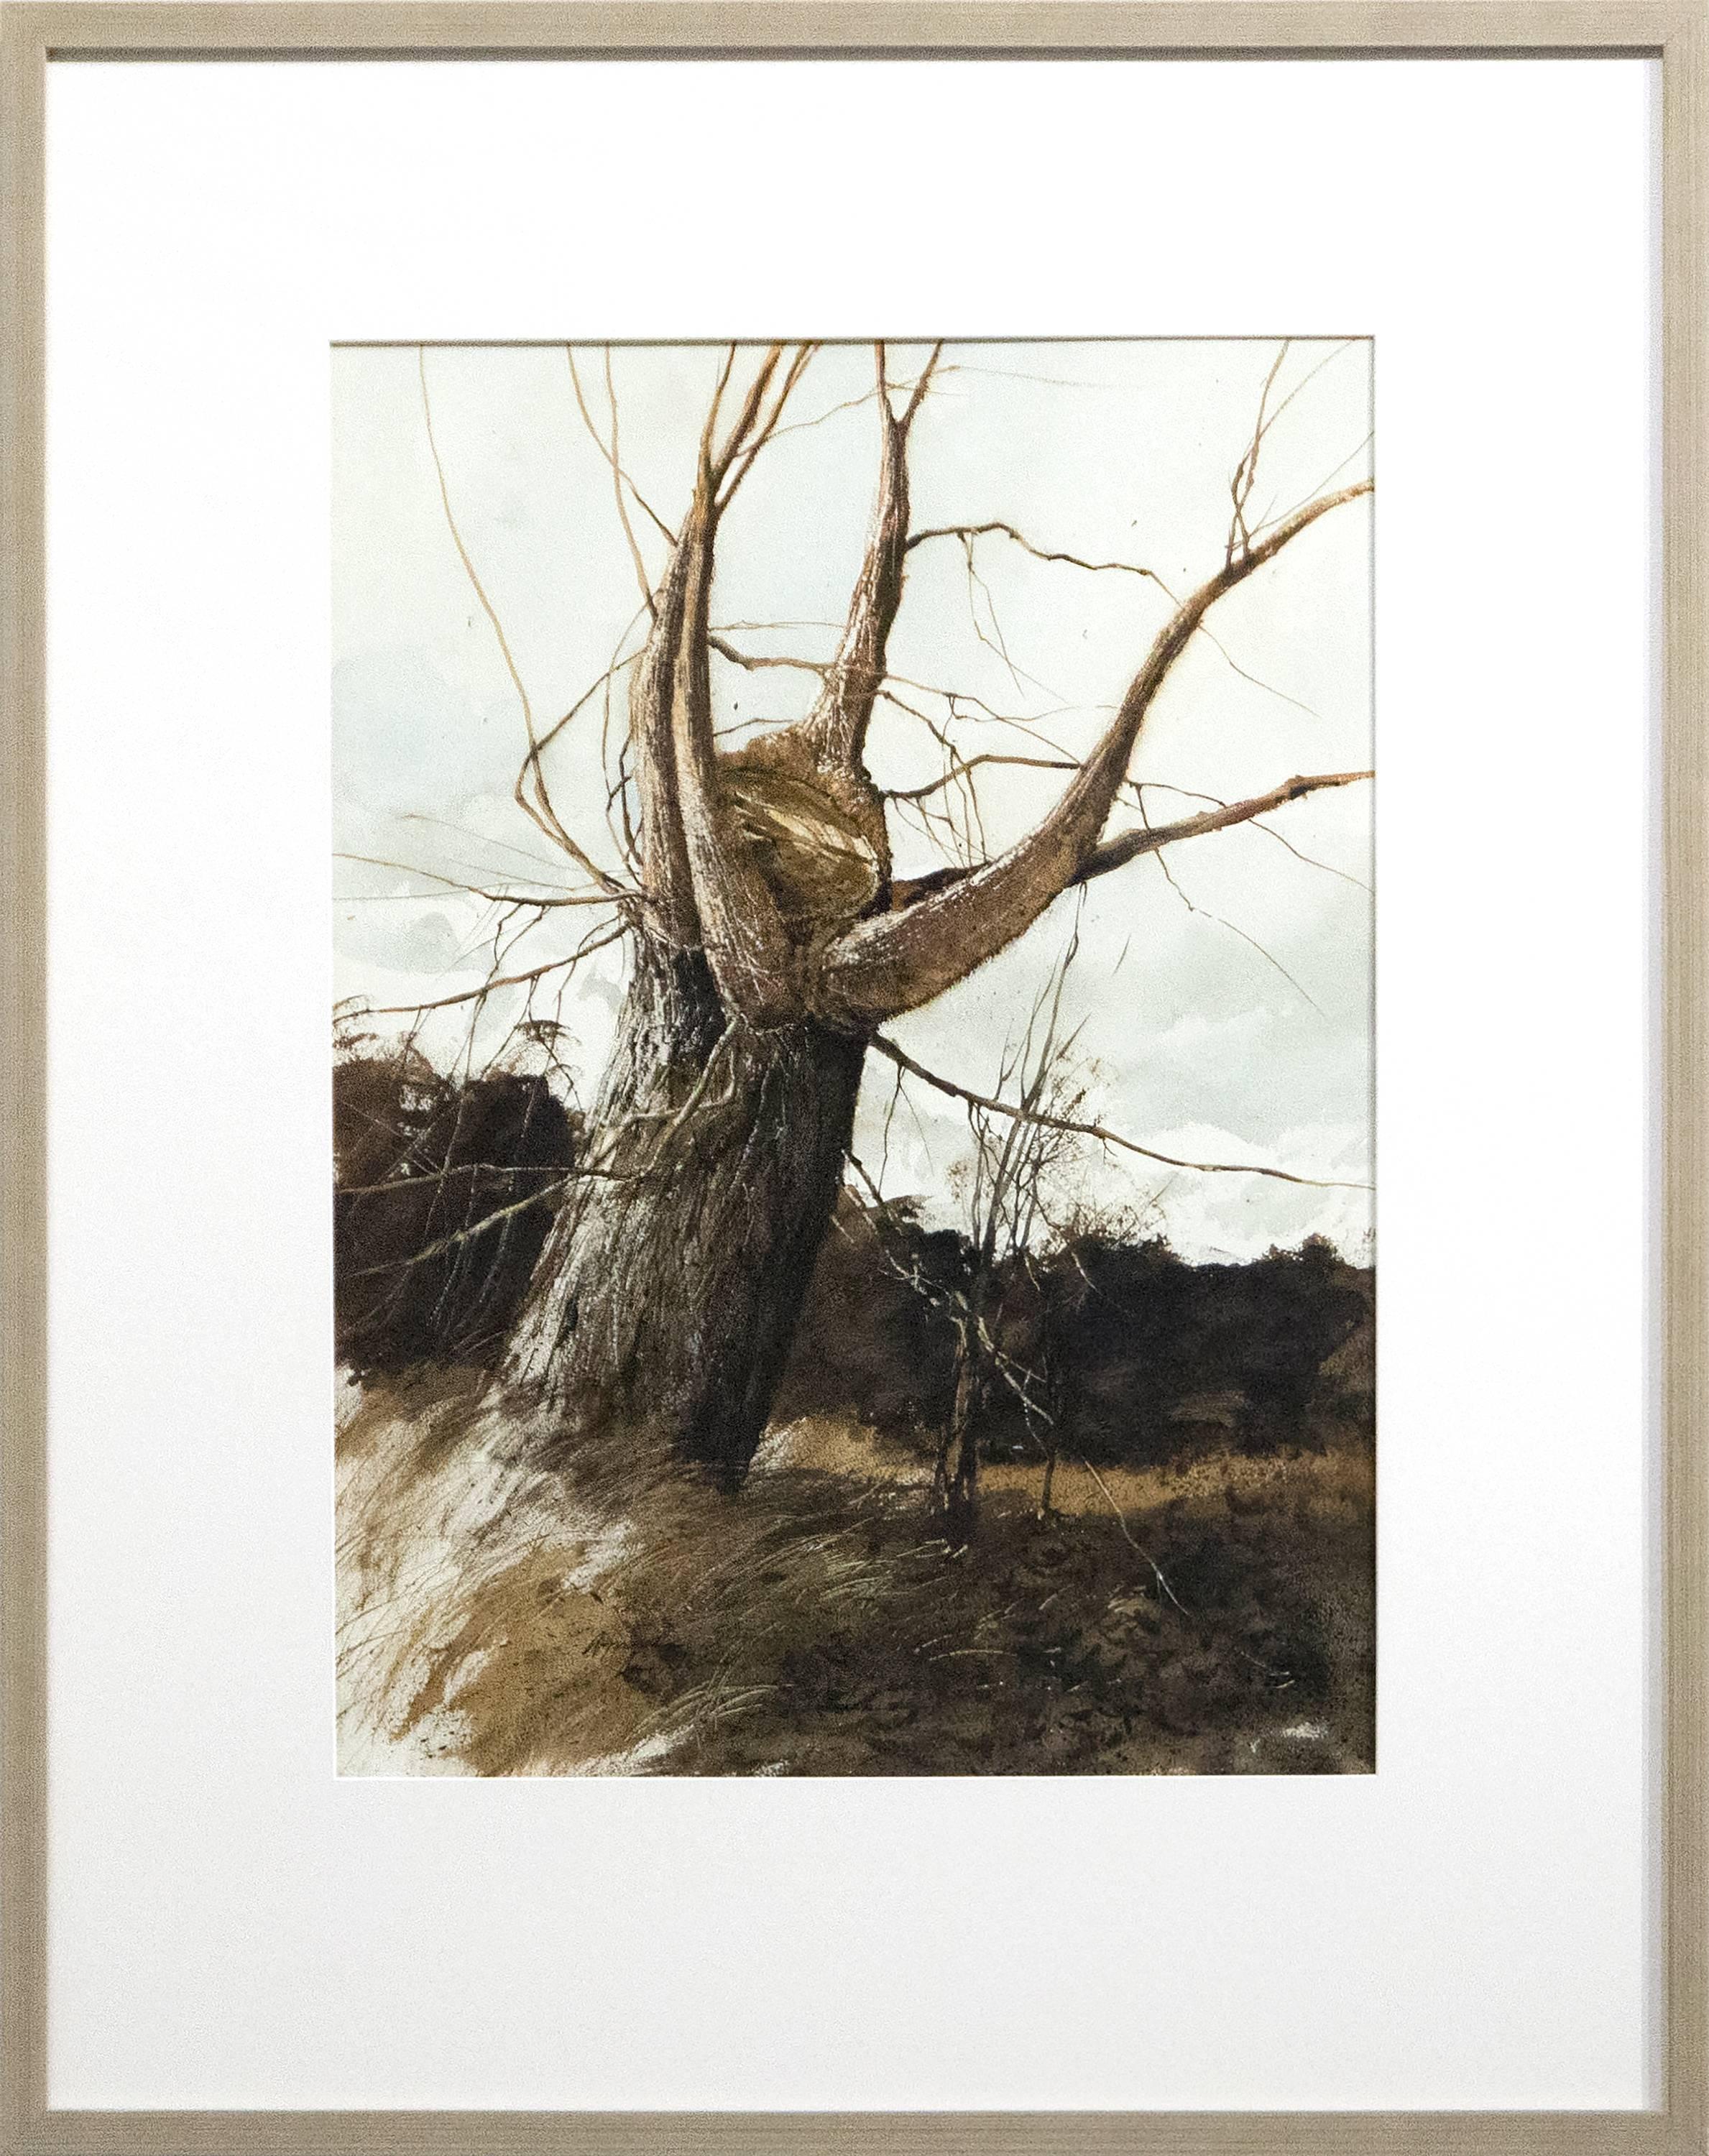 Approaching Storm, New Branches - Art by Gregory Sumida